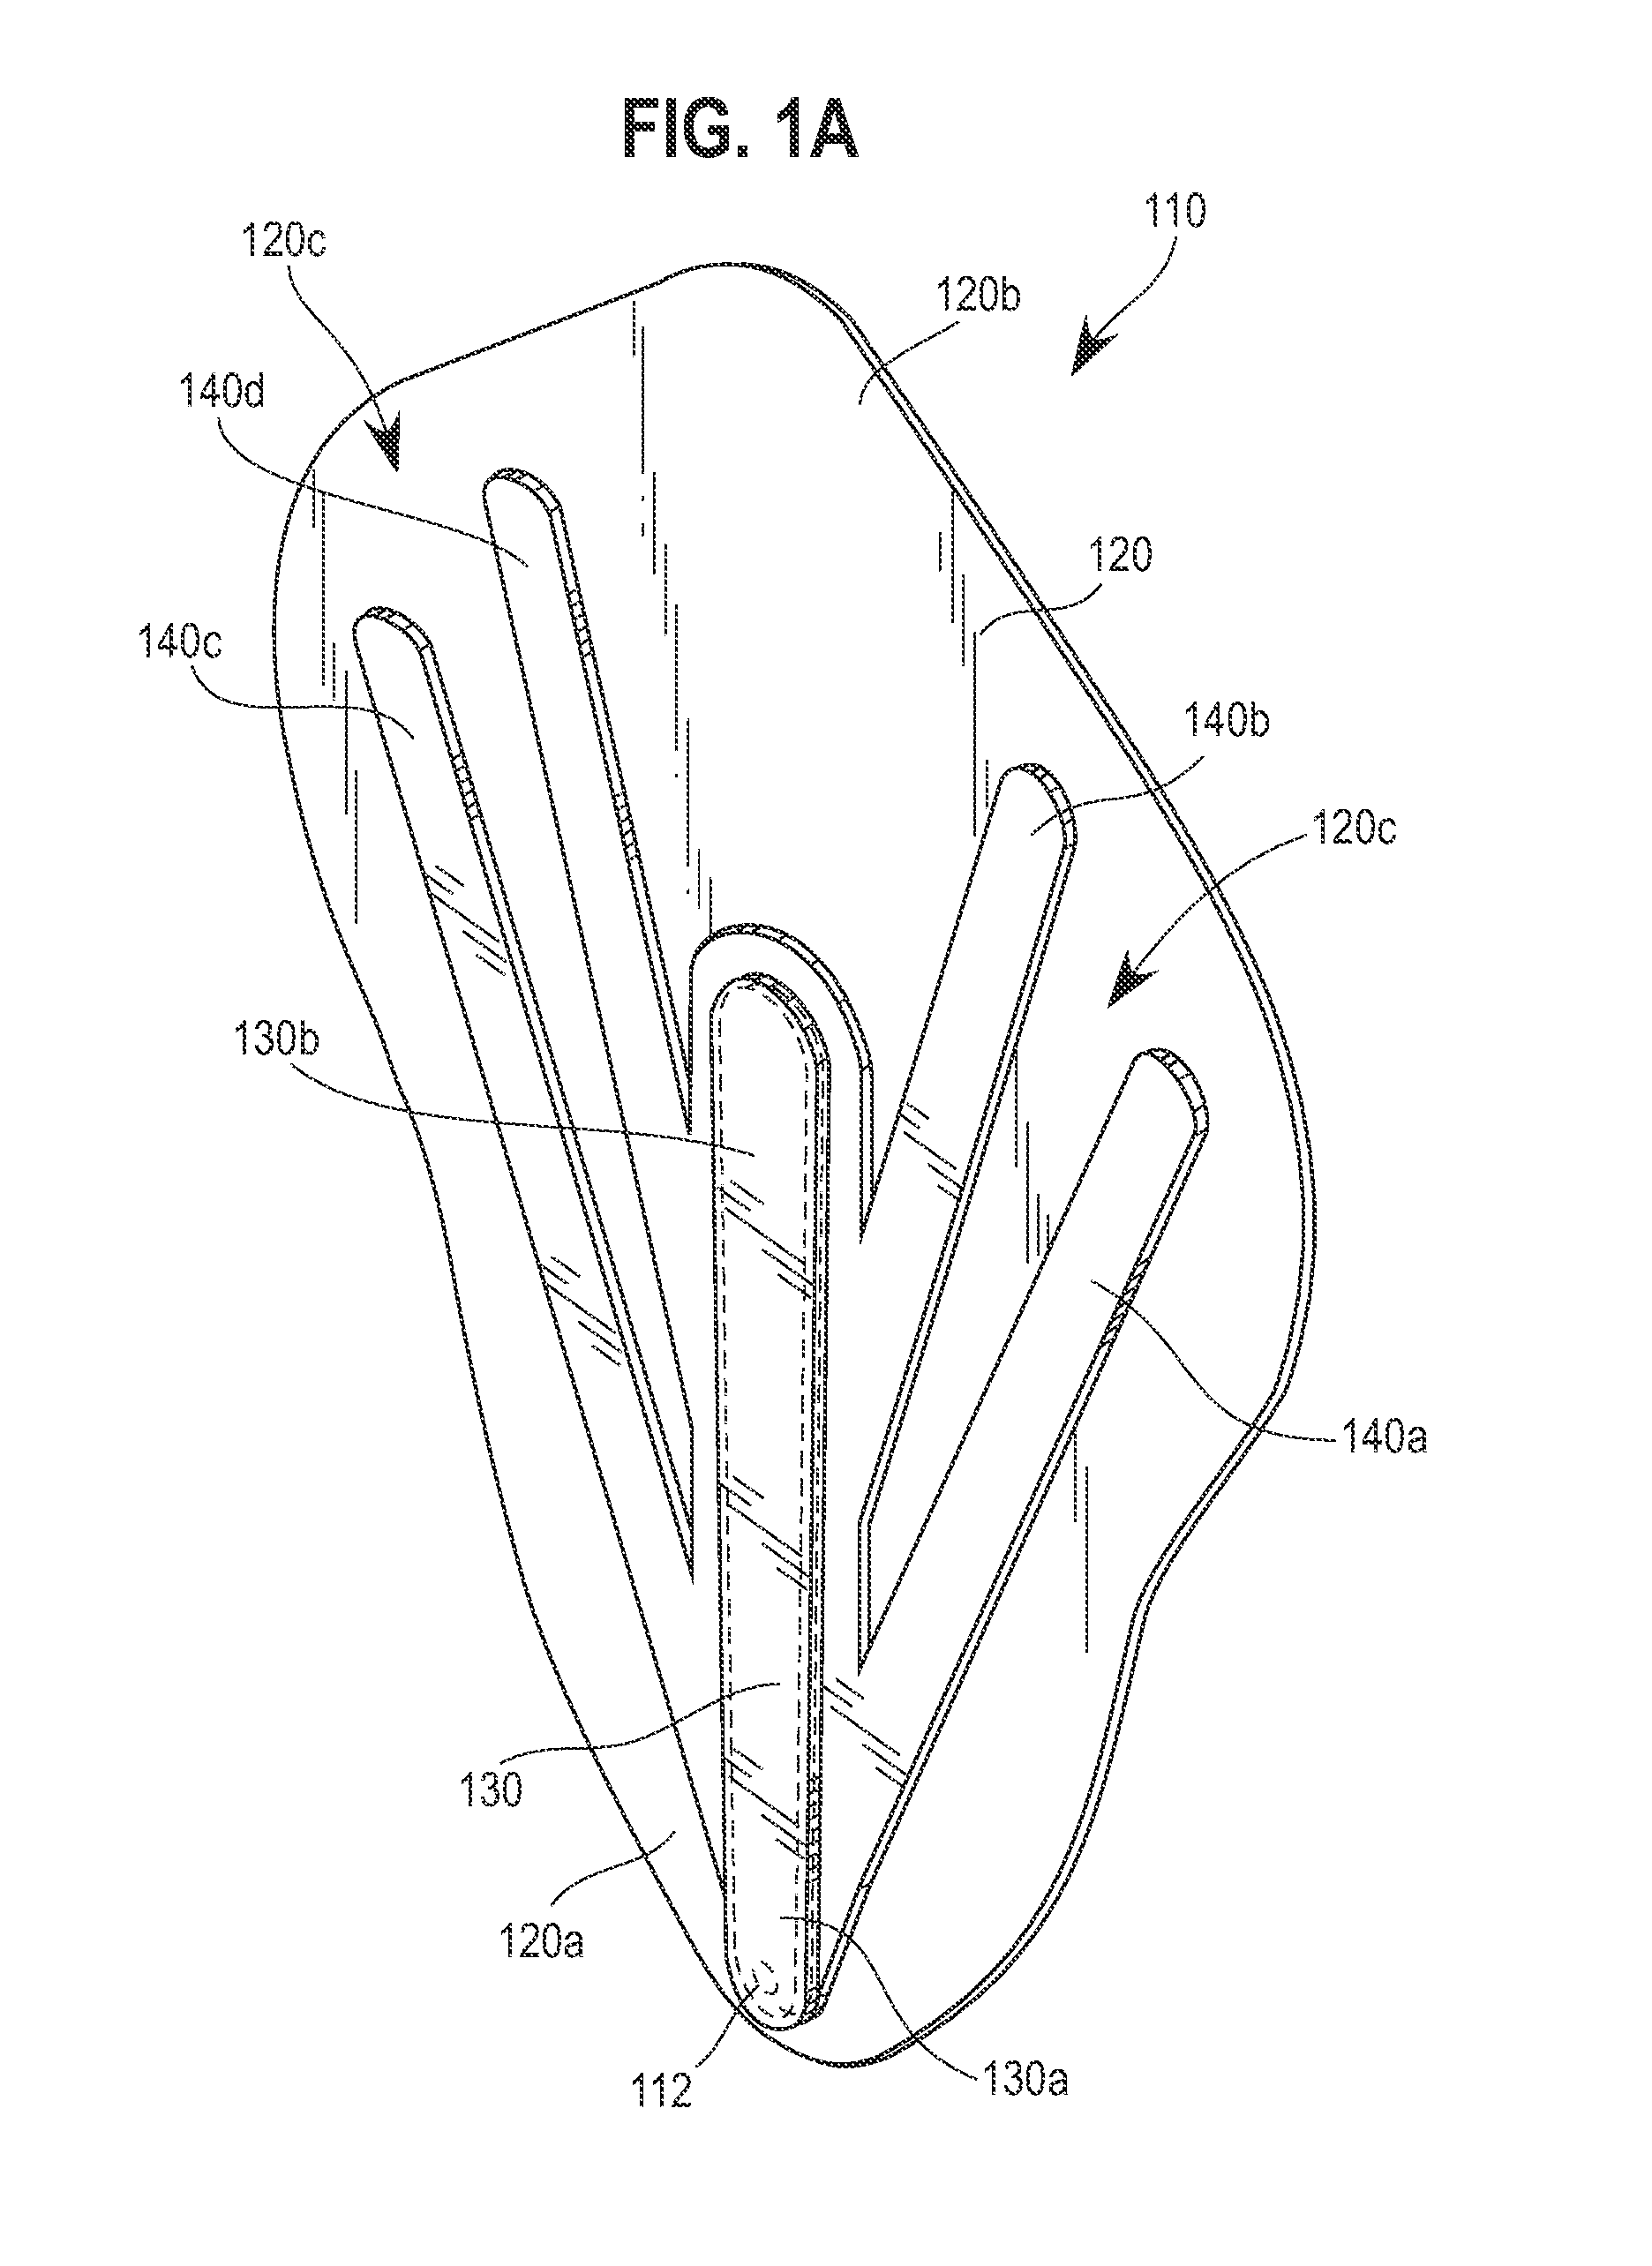 Method and apparatus for assisting in wound closure